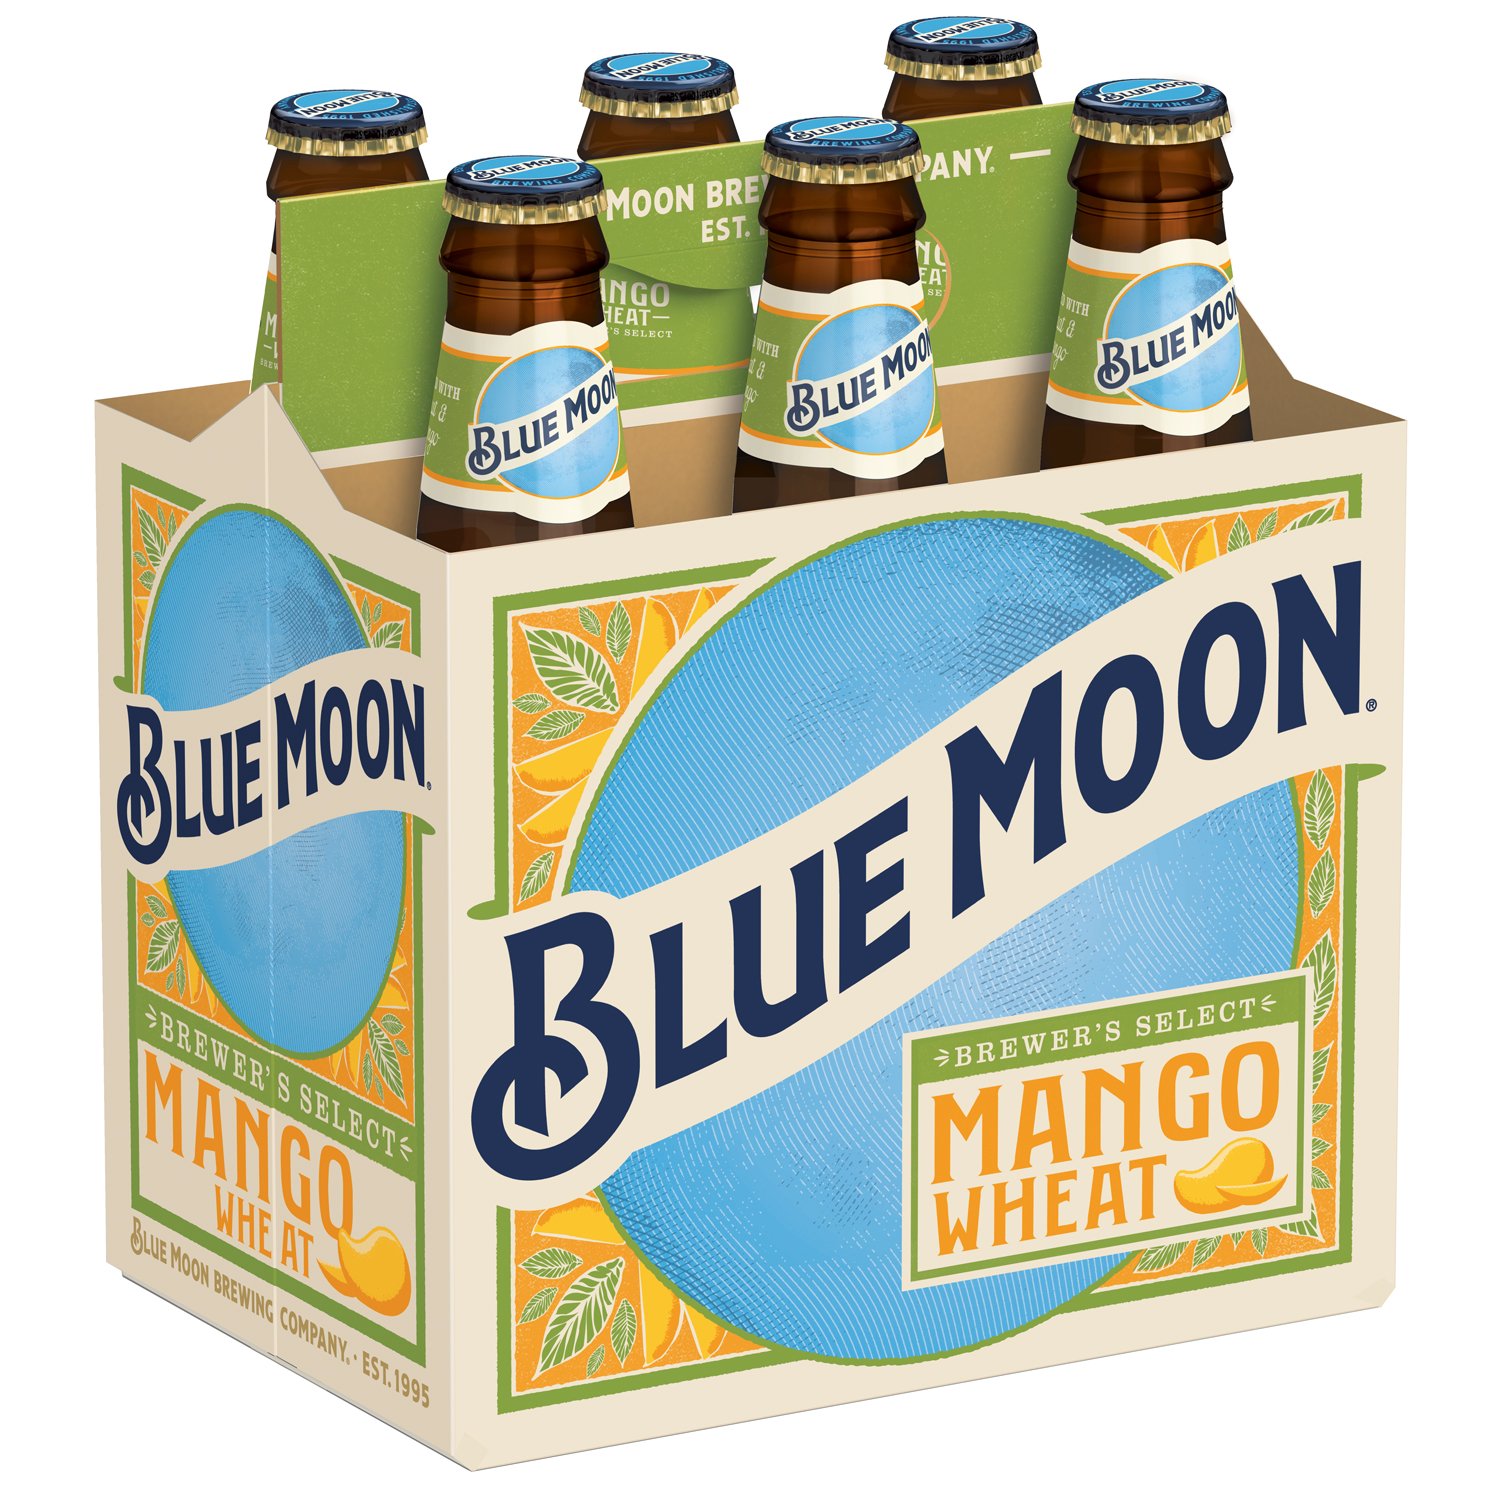 Blue Moon Mango Wheat Beer 12 Oz Bottles Shop Beer At H E B,Recipe For Mexican Cornbread